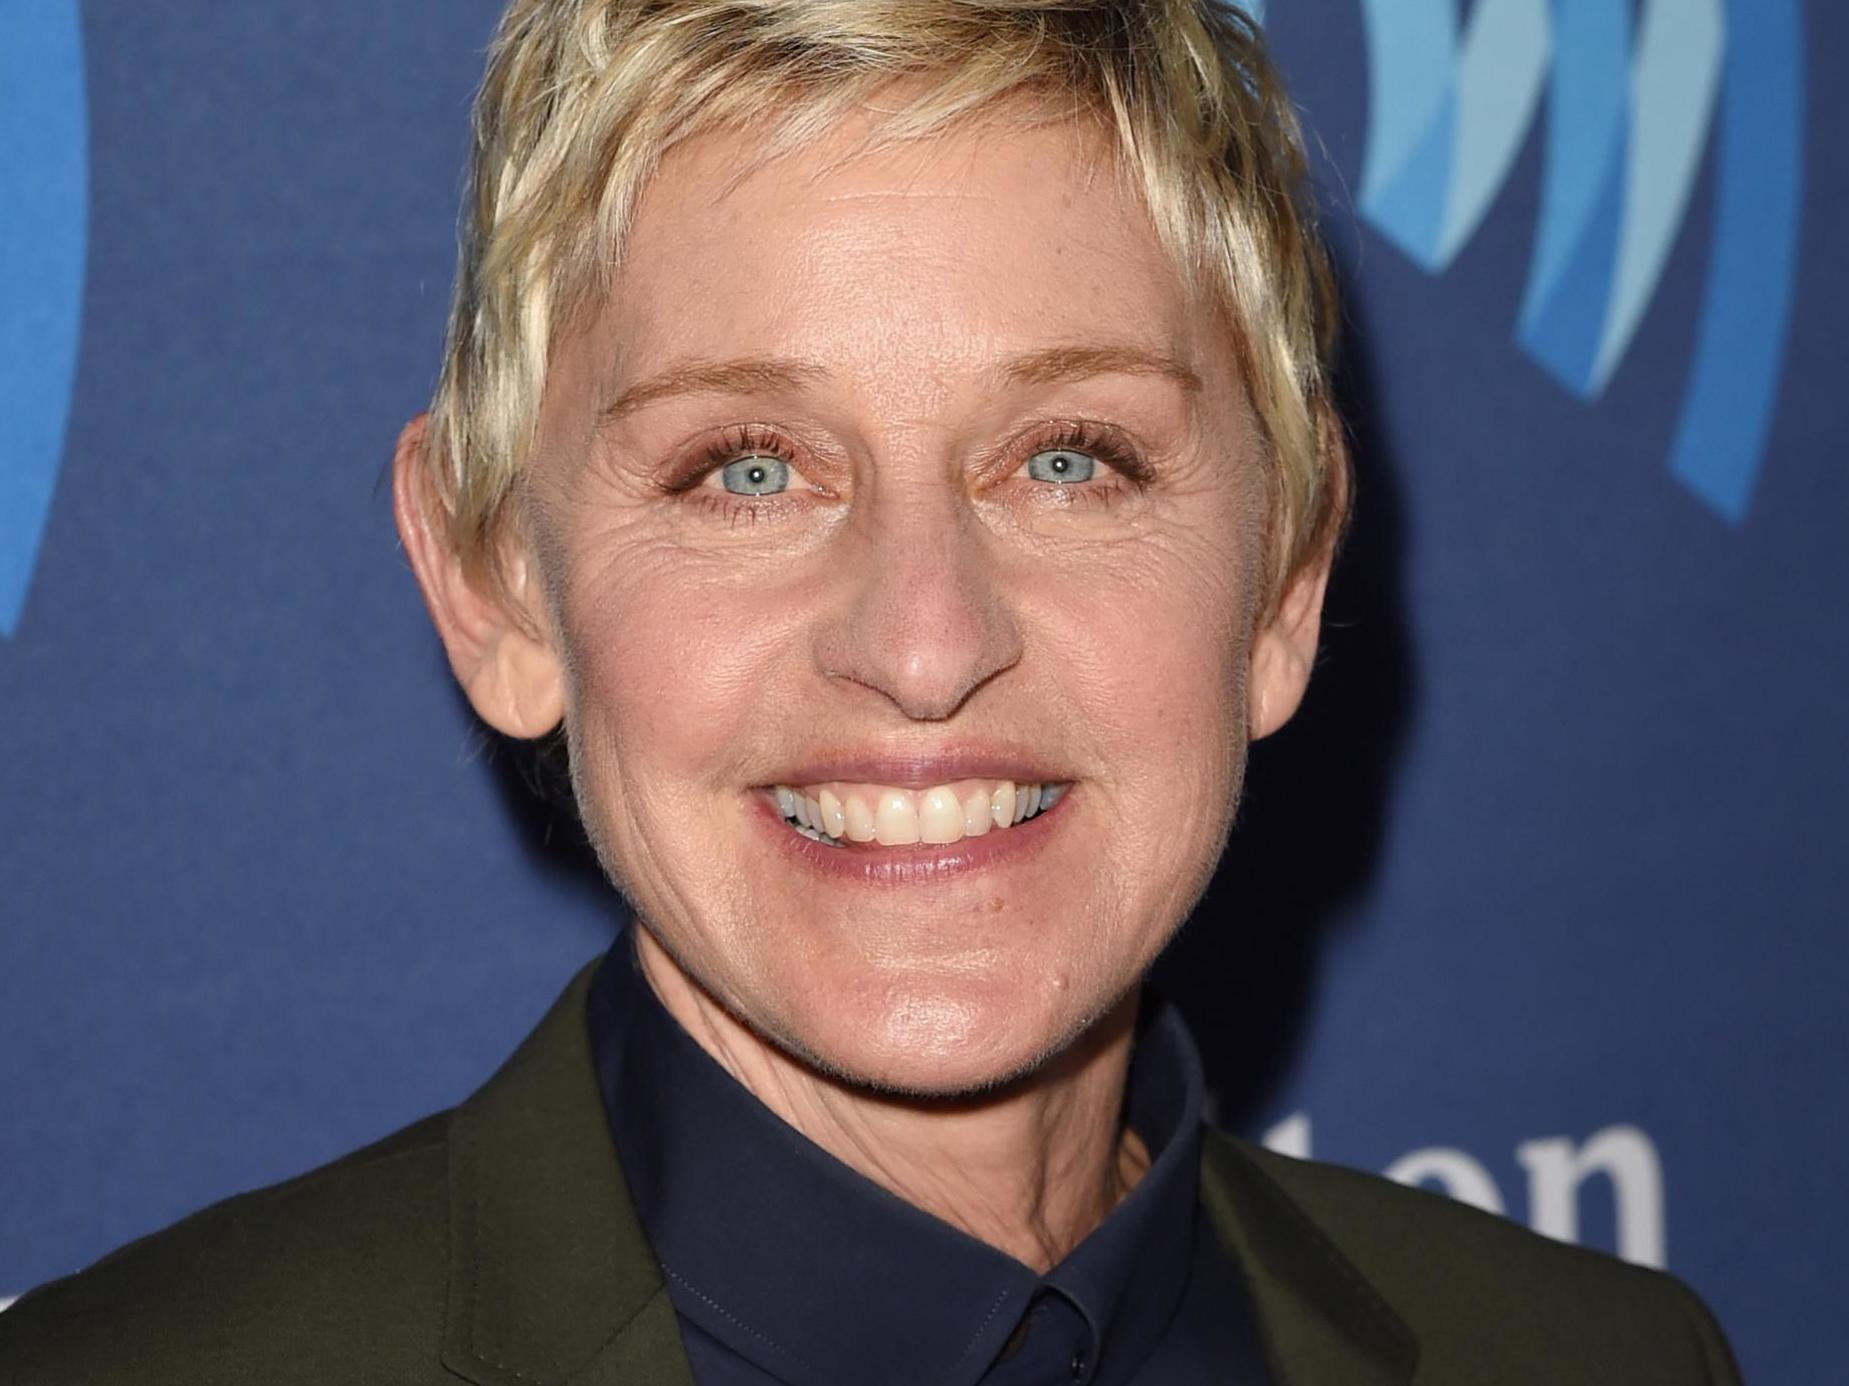 DeGeneres has found herself at the centre of numerous allegations of ‘mean’ behaviour